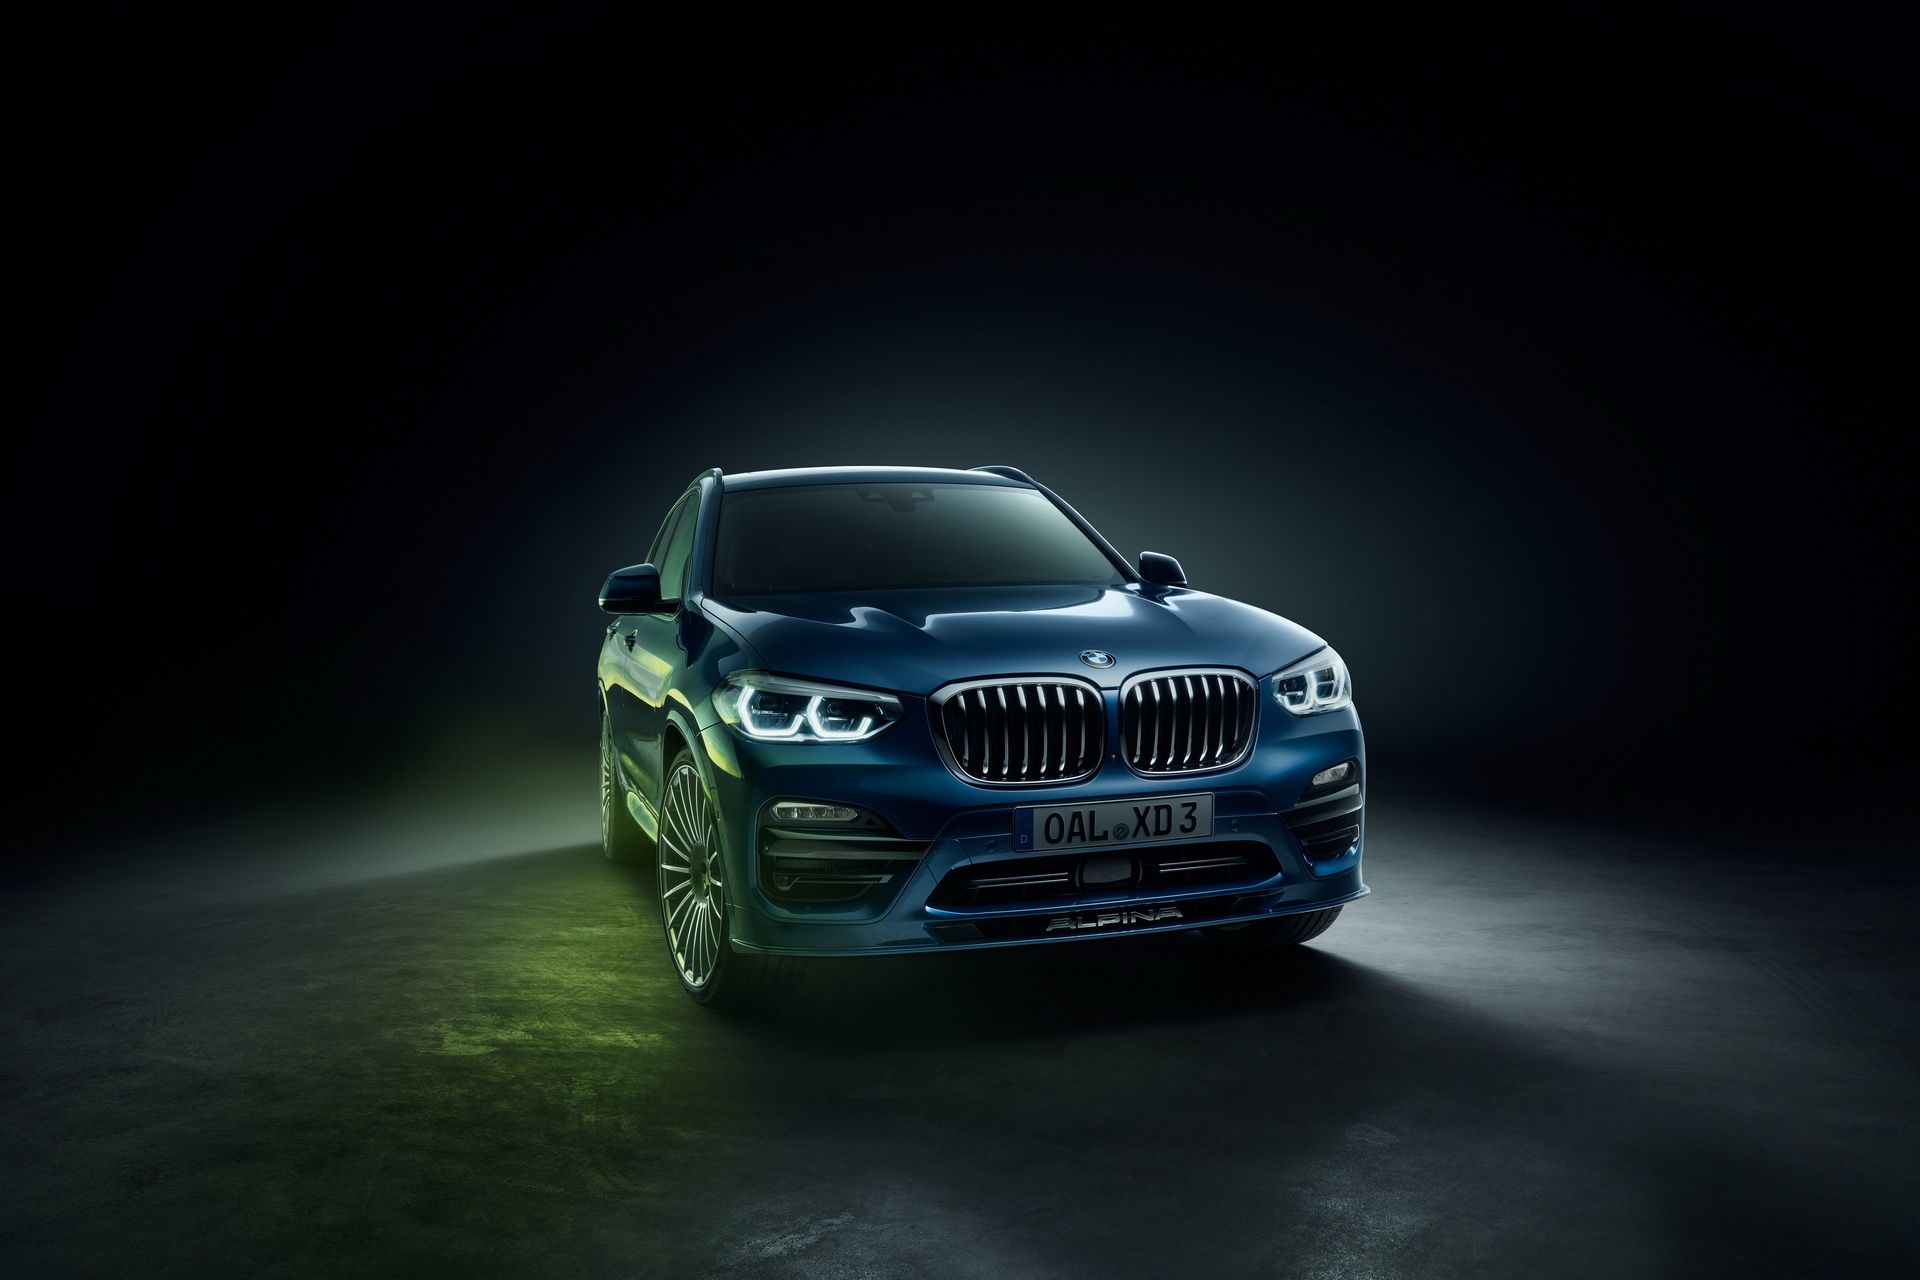 2018 Alpina Works Over the BMW X3 In All the Right Ways!